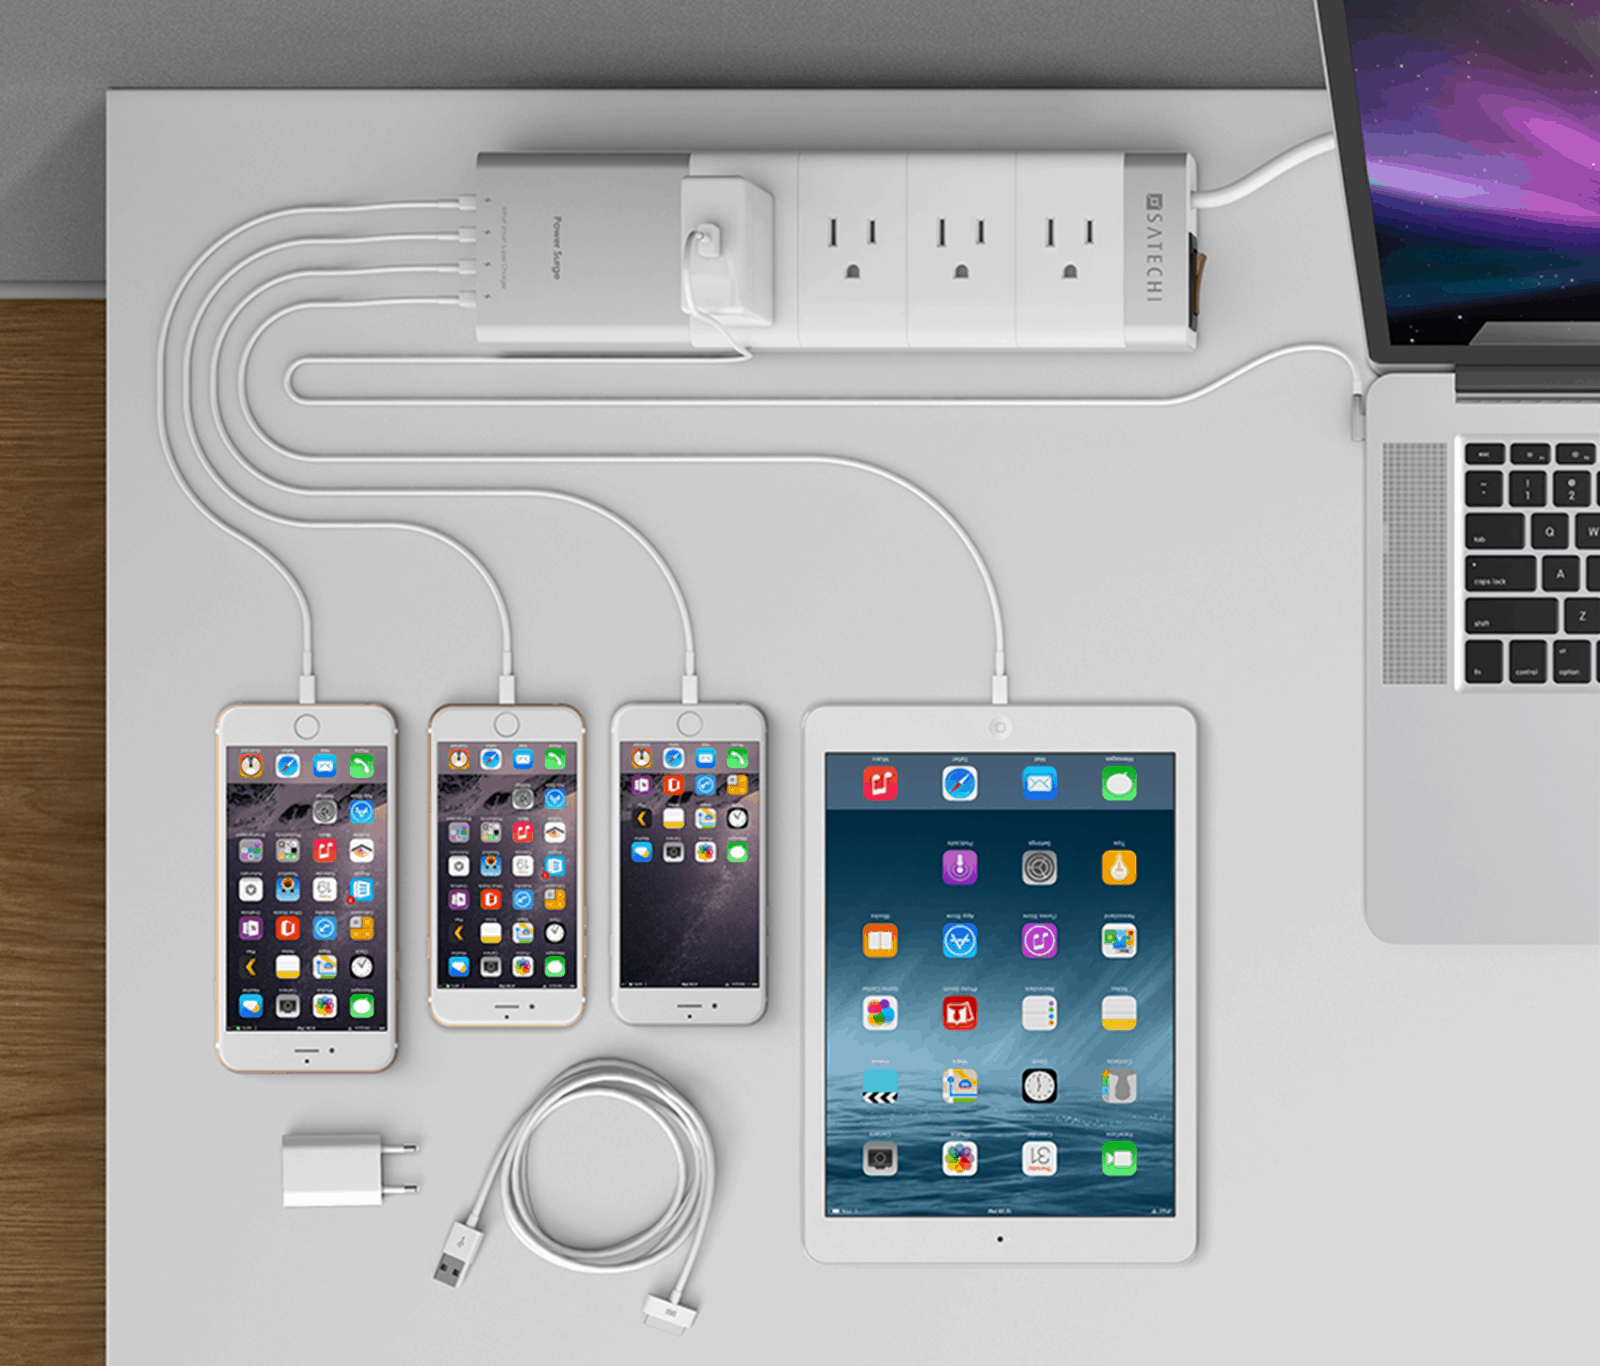 Satechi's aluminum power strip provides one elegant charging home for your devices.